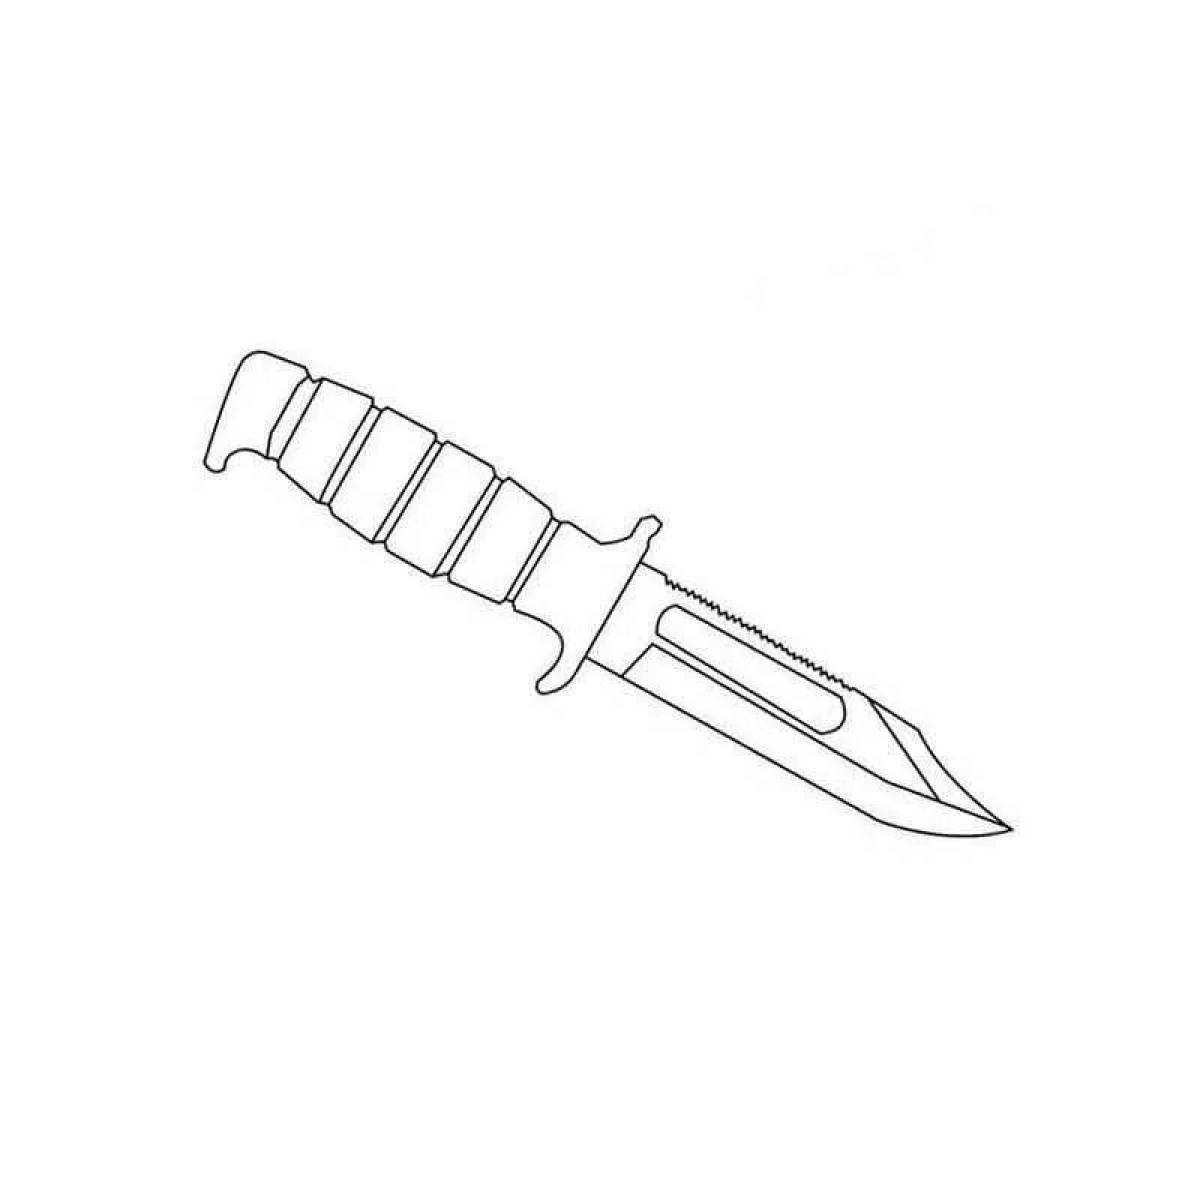 Coloring page for a bayonet with a complex design